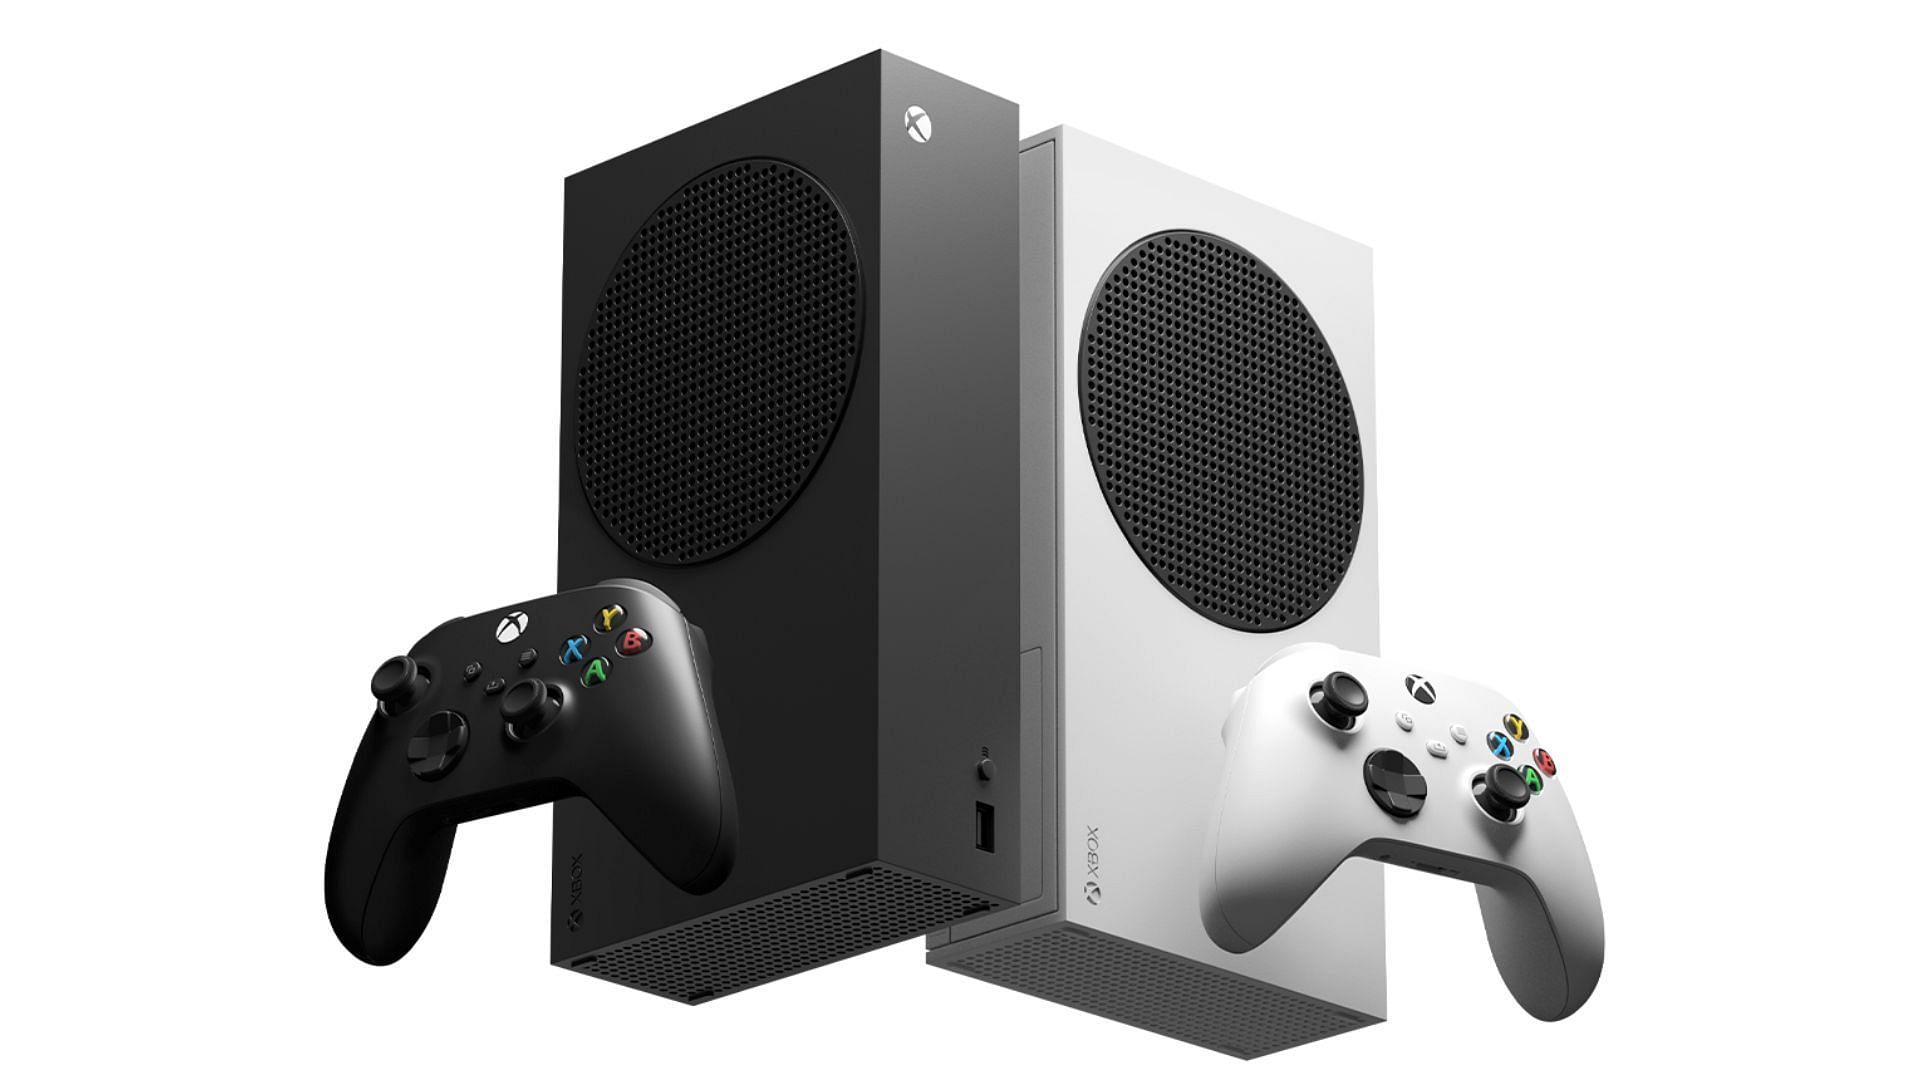 Consoles can be used standalone or with gaming PCs (Image via Xbox)